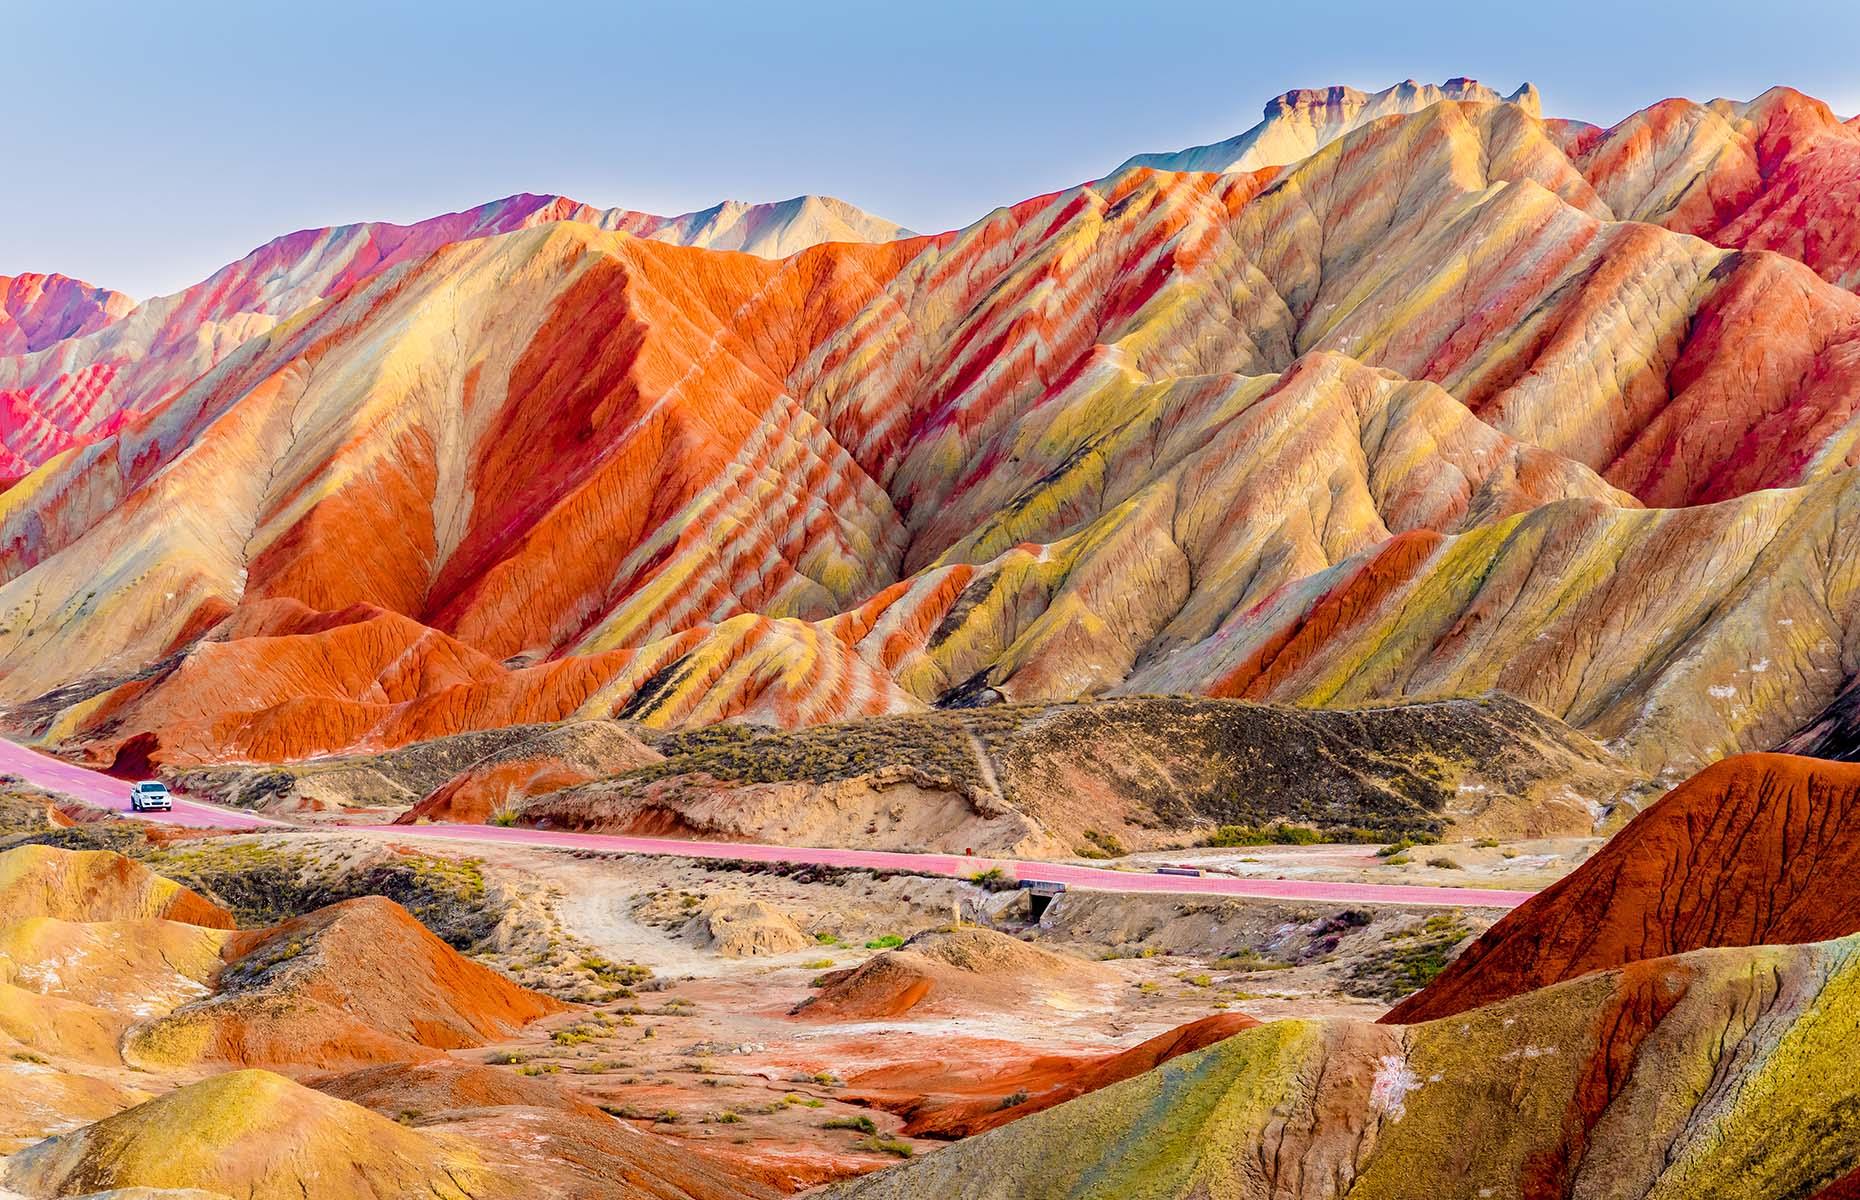 The rainbow-hued mountains in Zhangye National Geopark look just like an artist's paint palette. Part of an UNESCO World Heritage Site, this stunning formation was created by natural erosion, when layers of sand, silt, iron and minerals blended together to create a kaleidoscope of colours. The incredible park appears to have been decorated by Mother Nature herself.